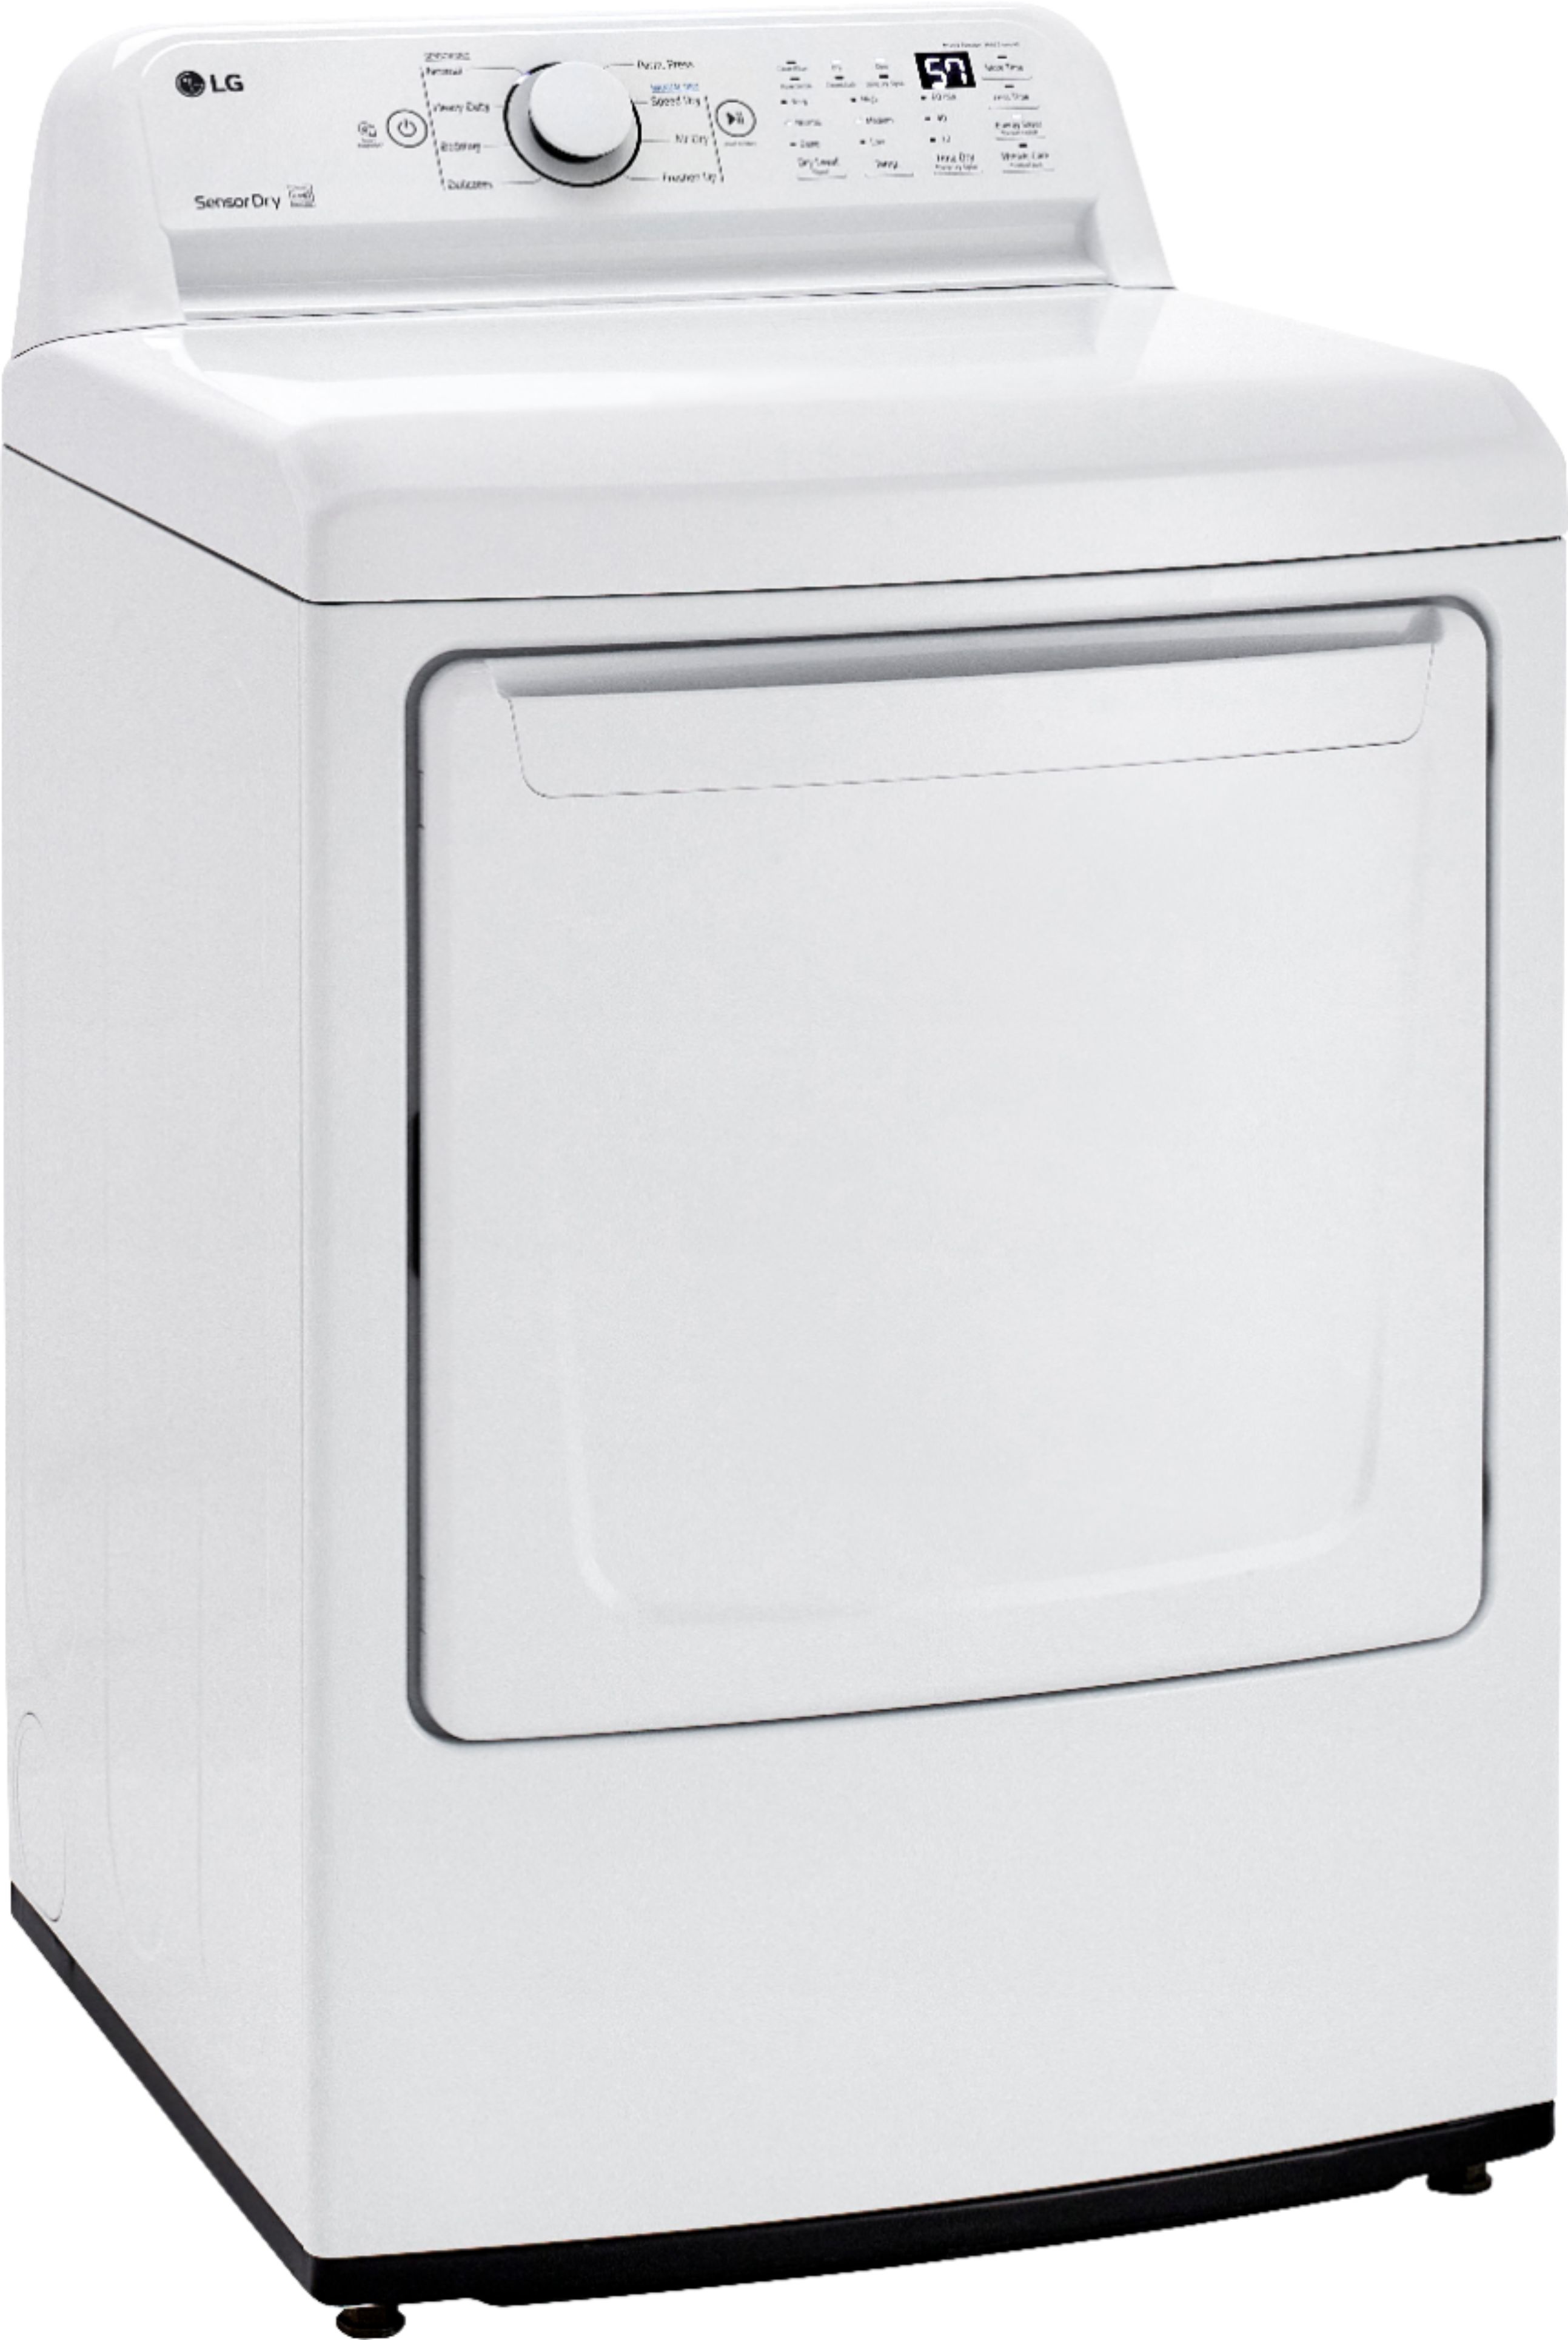 Angle View: LG - 7.3 Cu. Ft. Electric Dryer with Sensor Dry - White